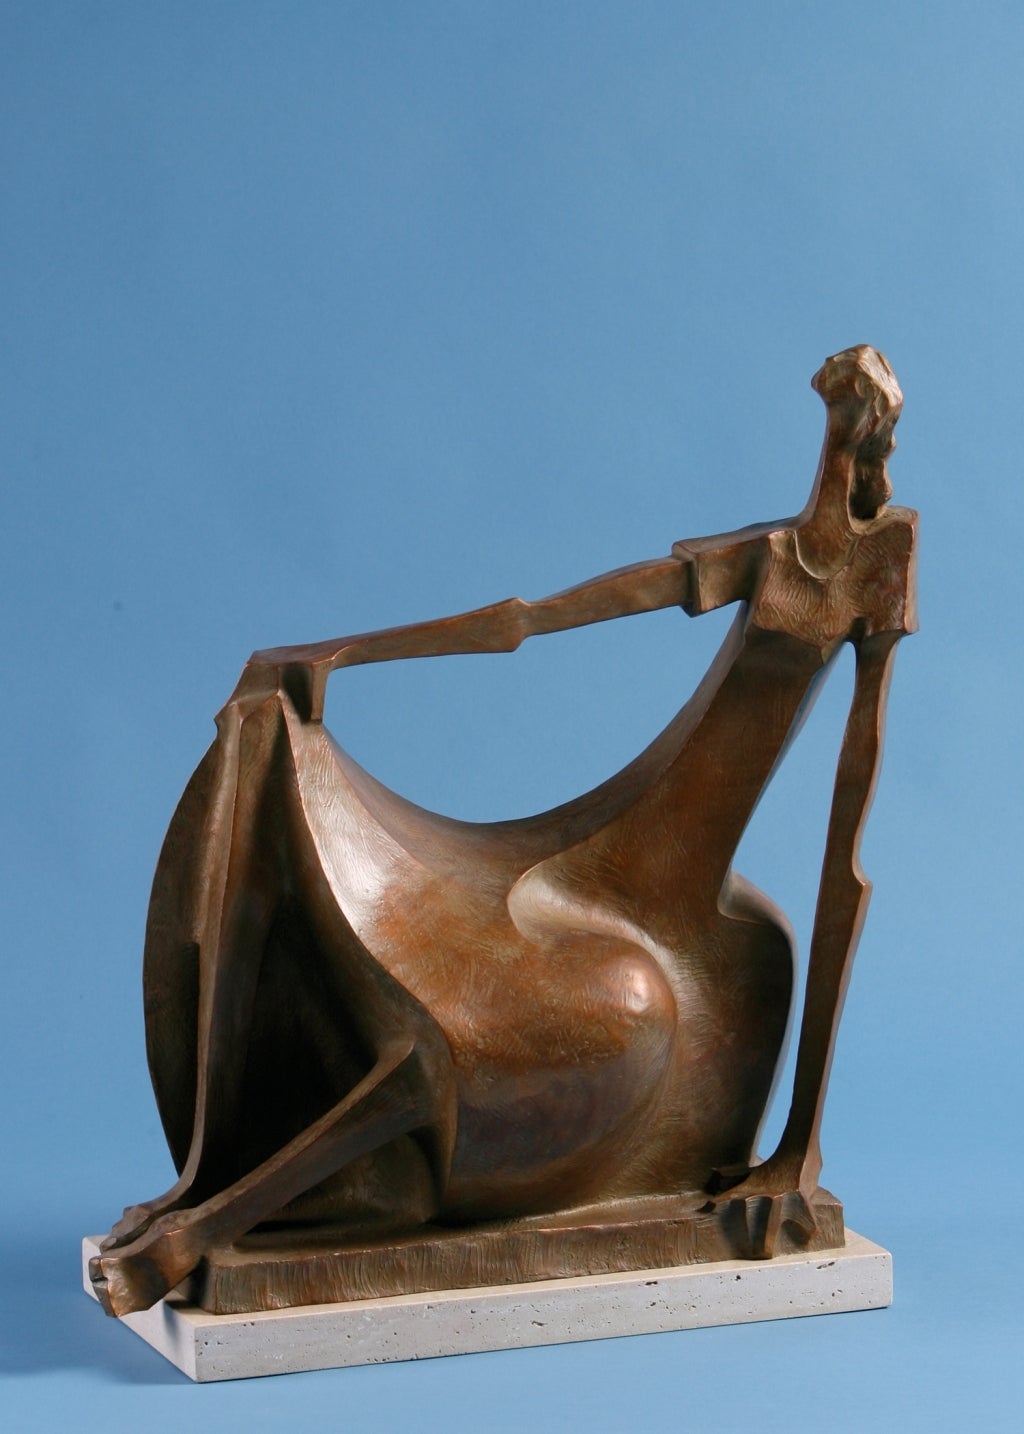 "Millicent 5/12" contemporary bronze sculpture of a woman sitting in full dress - Sculpture by Wayne Salge